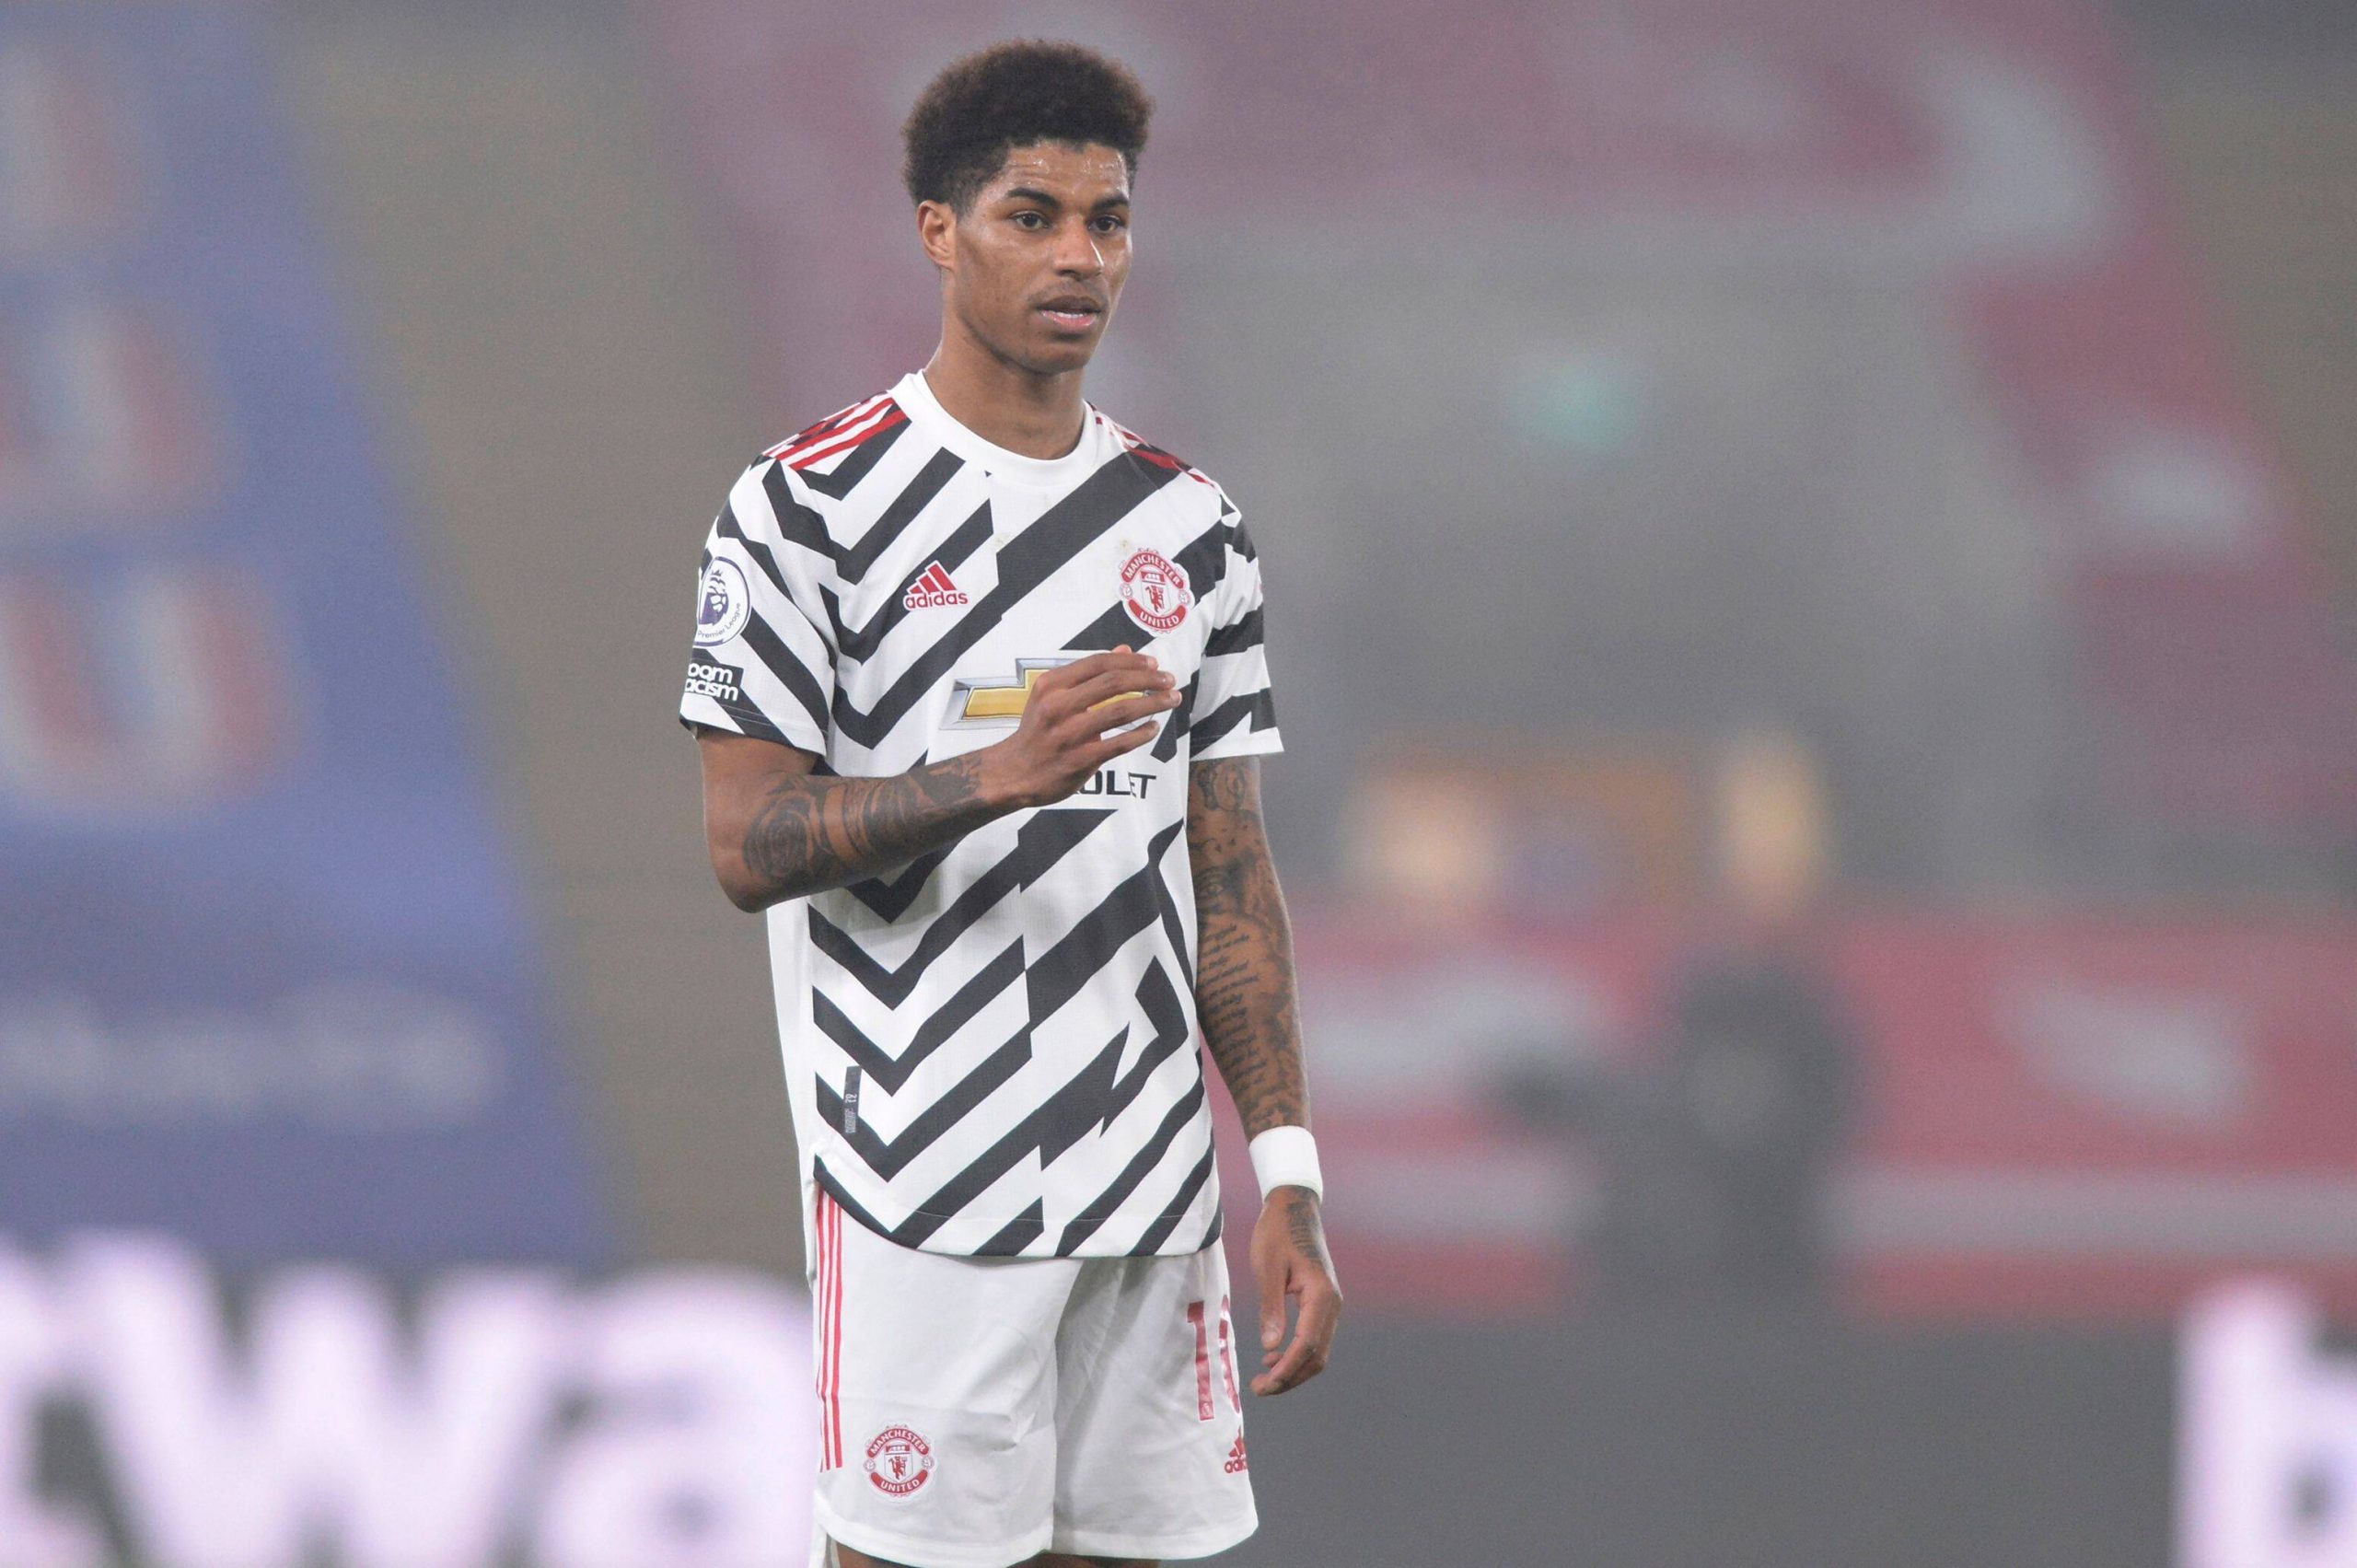 Marcus Rashford suffered an injury against AC Milan in the Europa League. (imago Images)